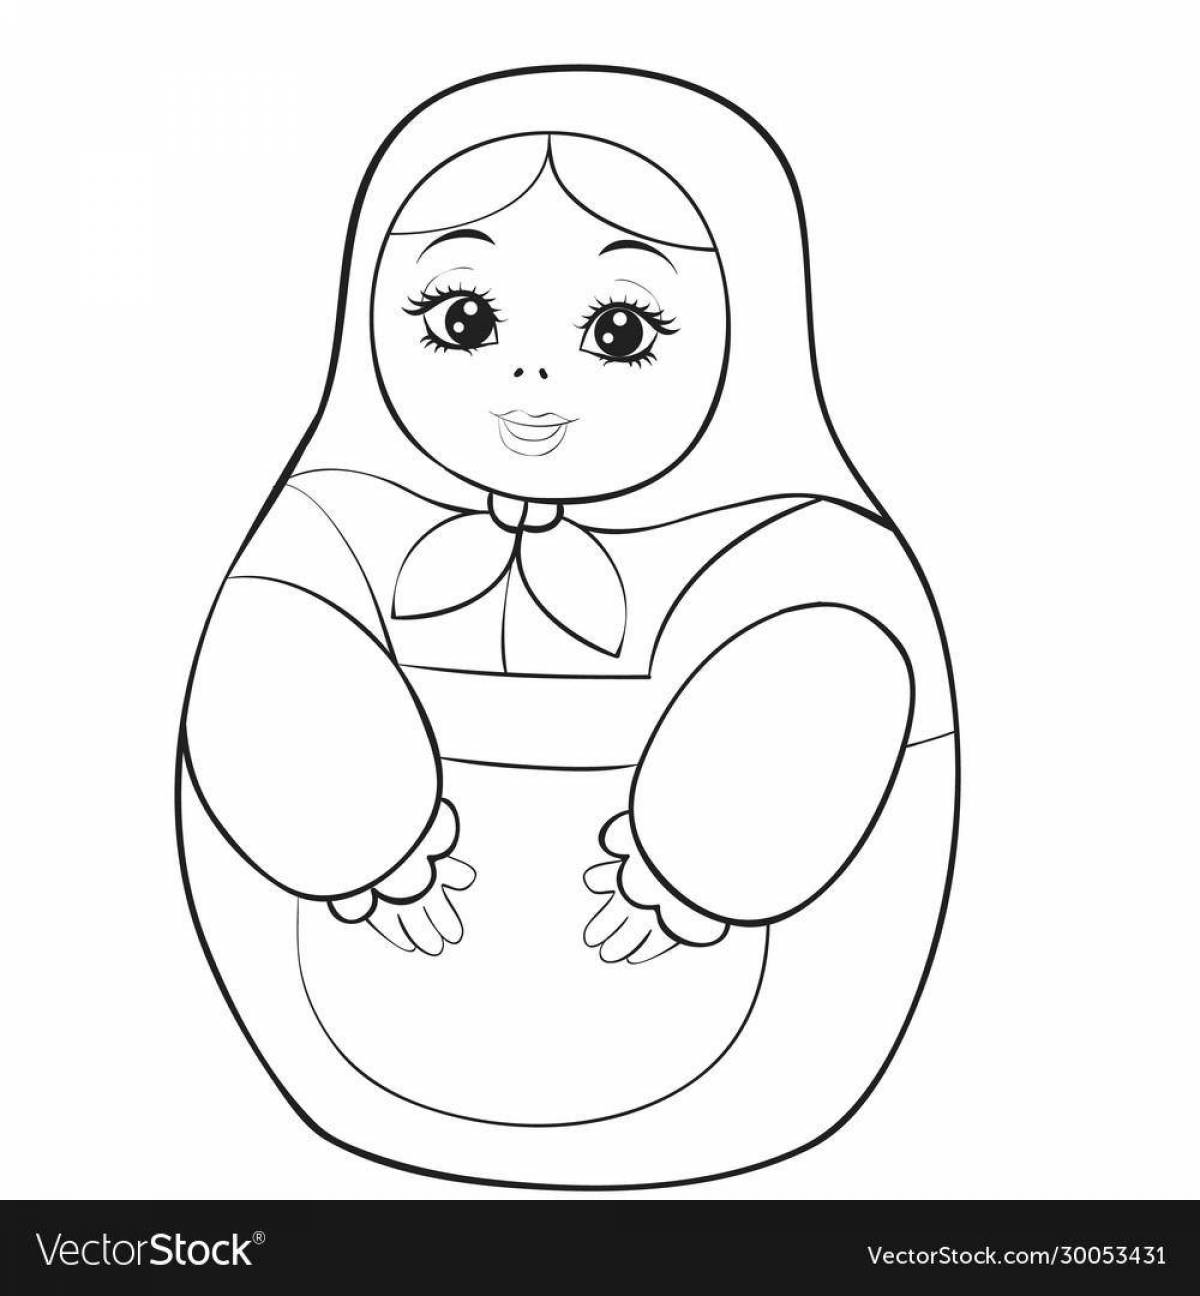 Coloring playful nesting doll 2 junior group